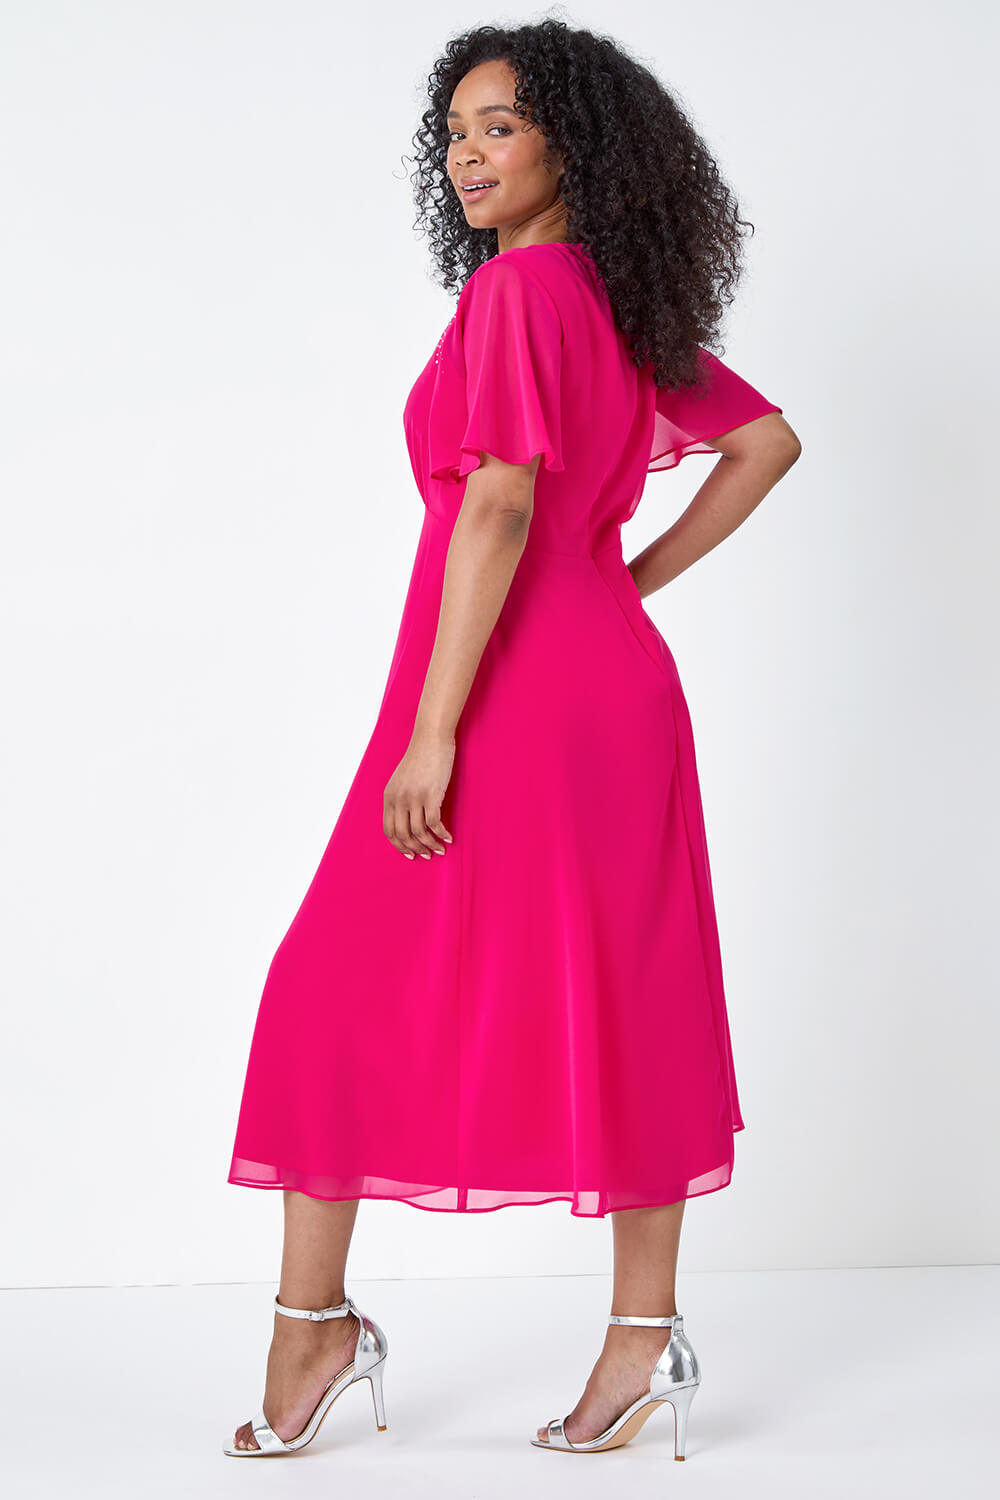 PINK Petite Shimmer Pleated Midi Dress, Image 3 of 5